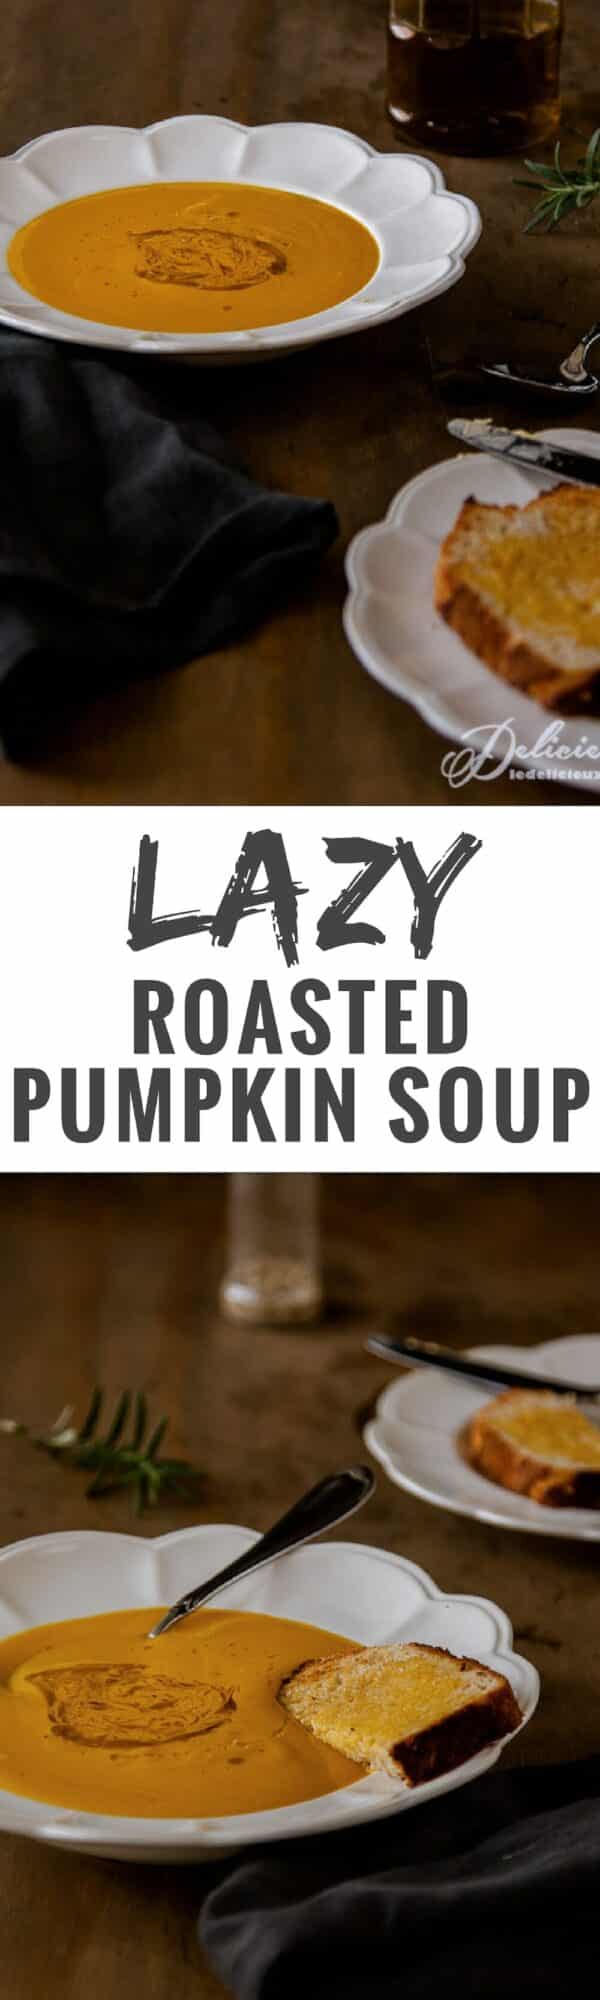 The ultimate lazy roasted pumpkin soup - super easy and super delicious!